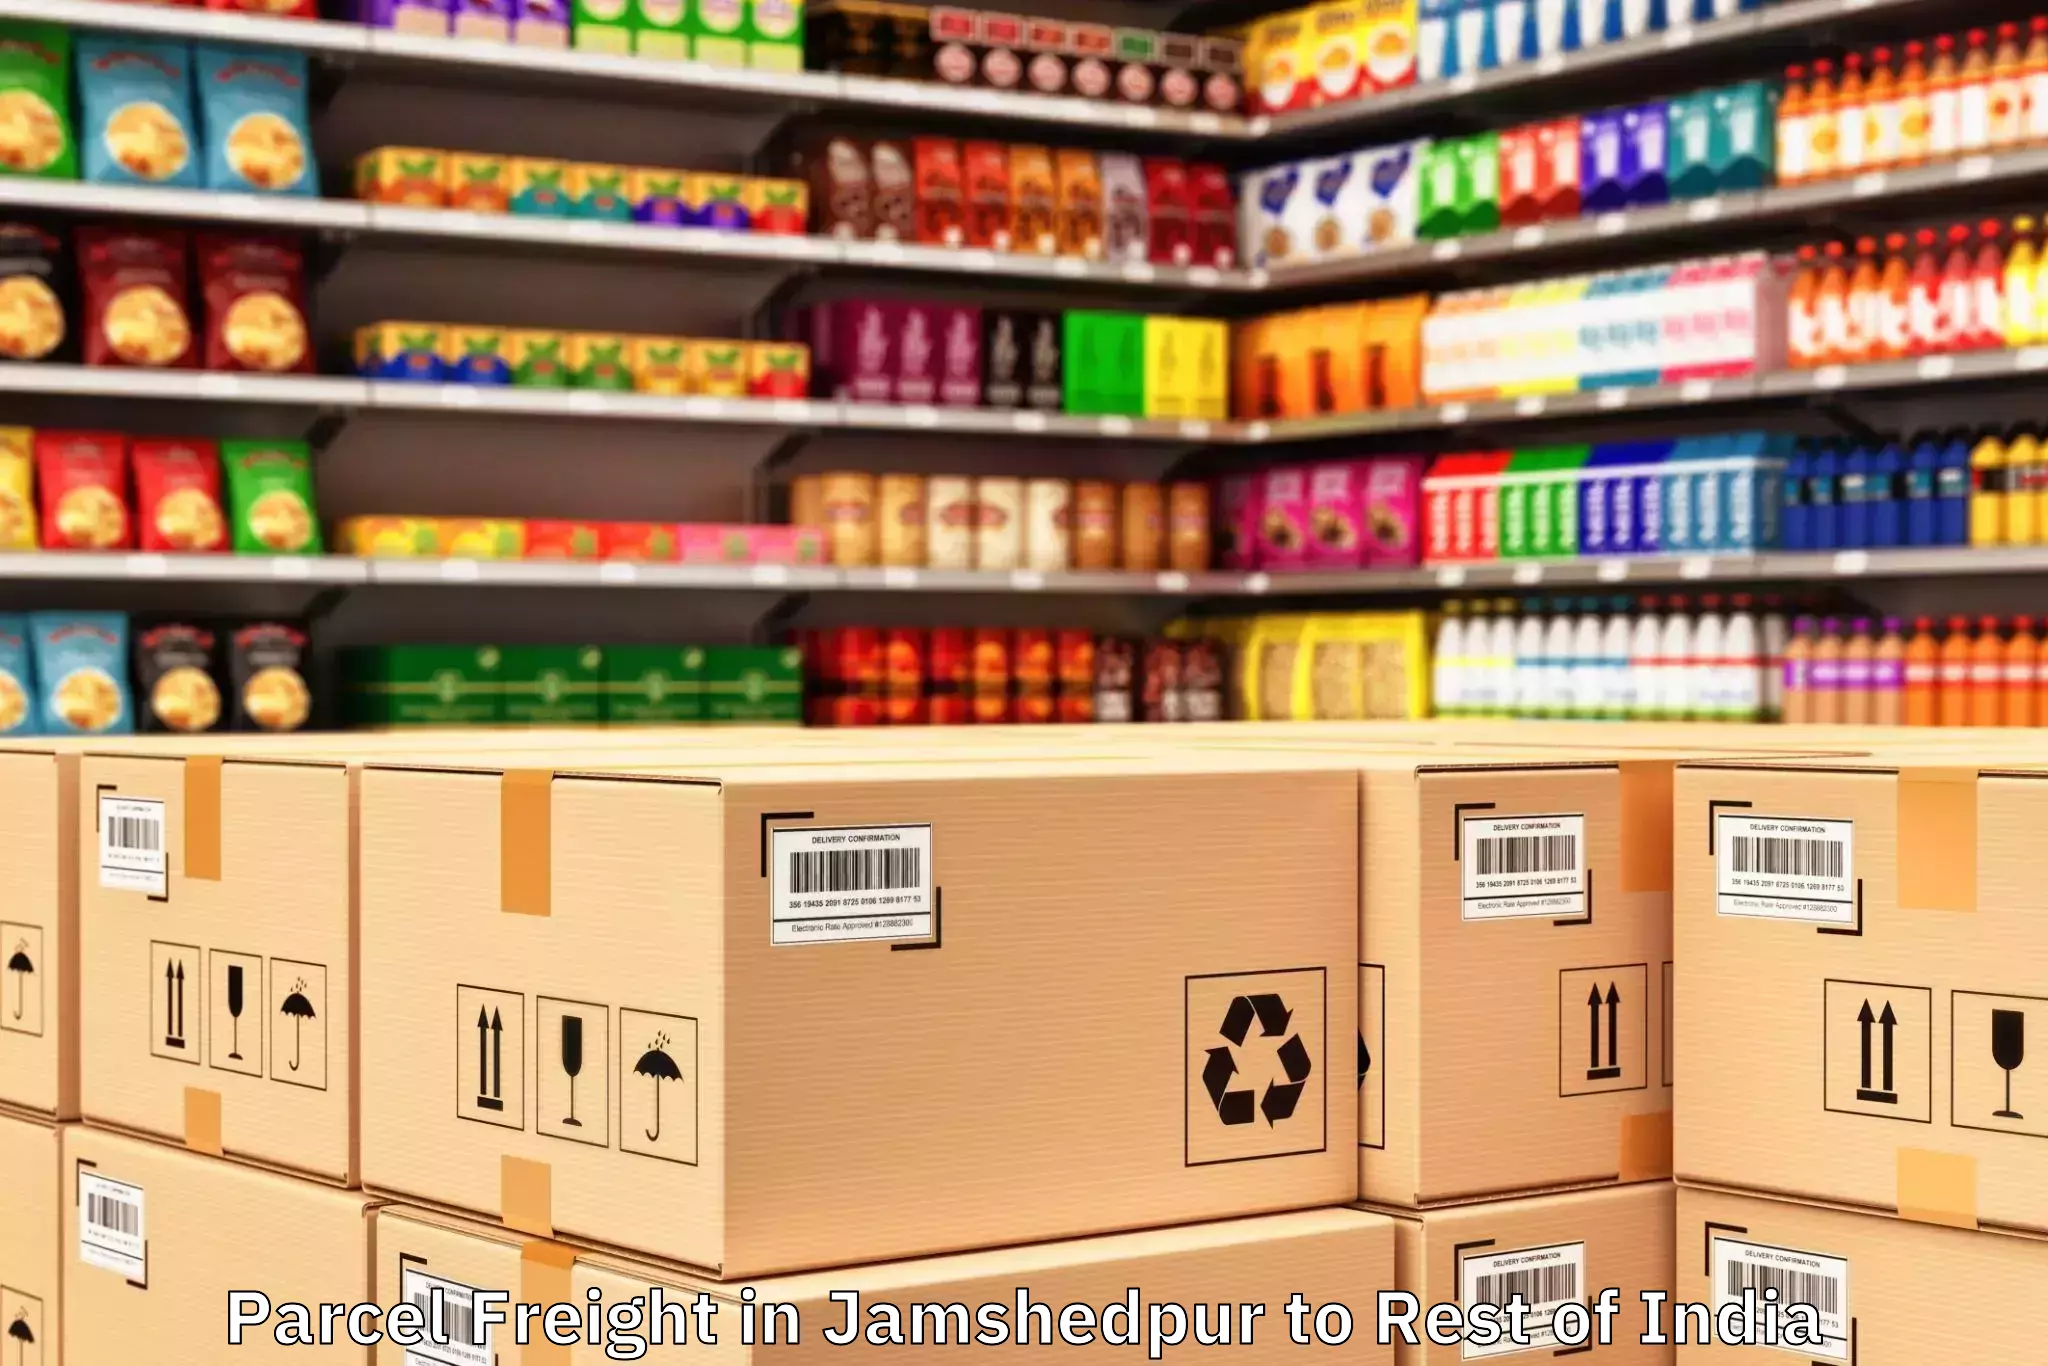 Book Your Jamshedpur to Dantepally Parcel Freight Today